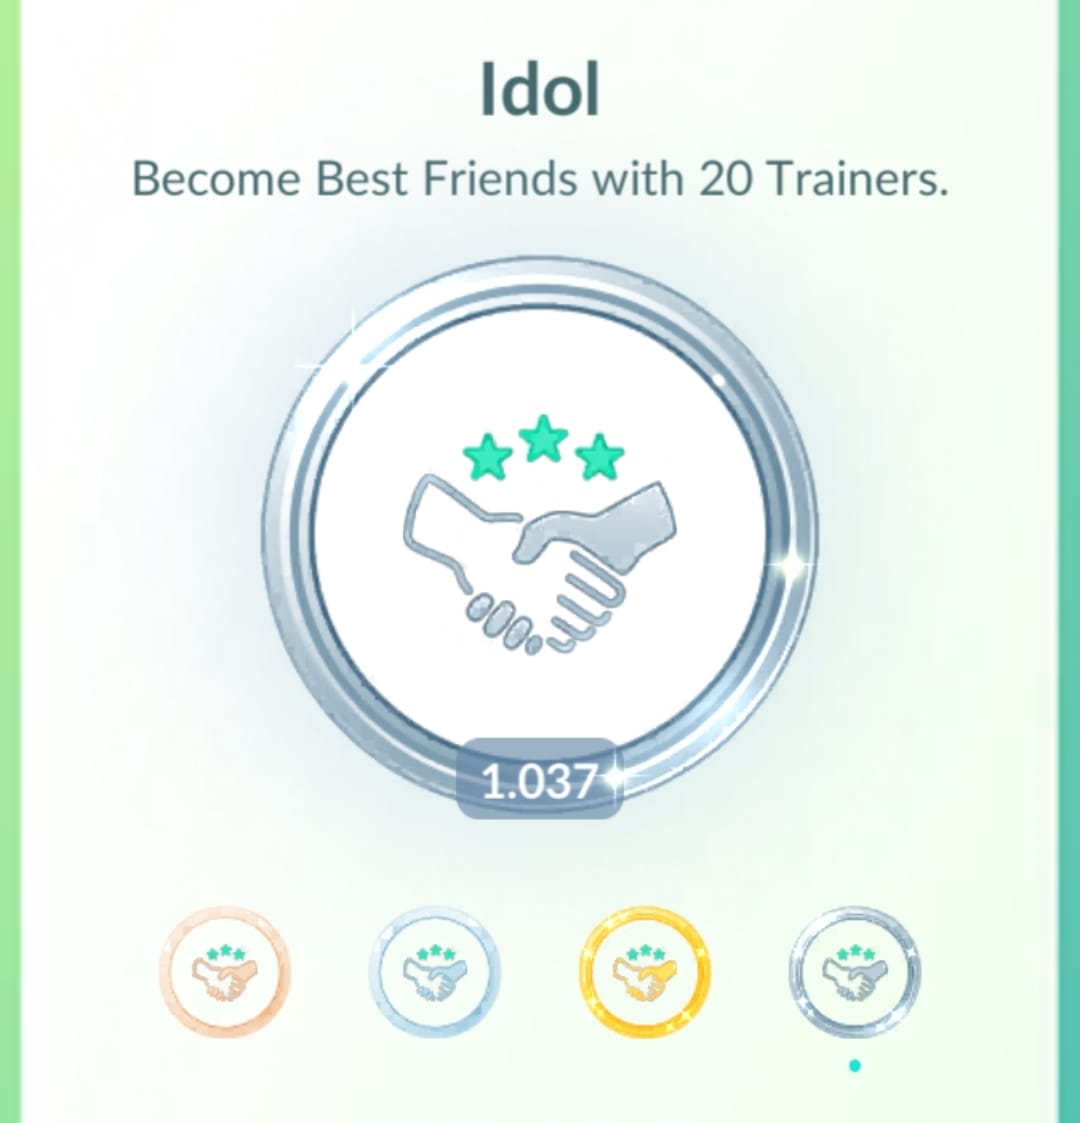 Looking for 20 new friends to go for Best Friends! (OPENERS) 🎁

* Sending from 🇳🇱
* I don't egg
* Able to PvP interact when I show online
* Slow progression = 🚮
* Add 0746 5790 3587 (send DM or reply to be added)

#PokemonGO #PokemonGoFriendCodes #Pokemon #PokemonGOfriends